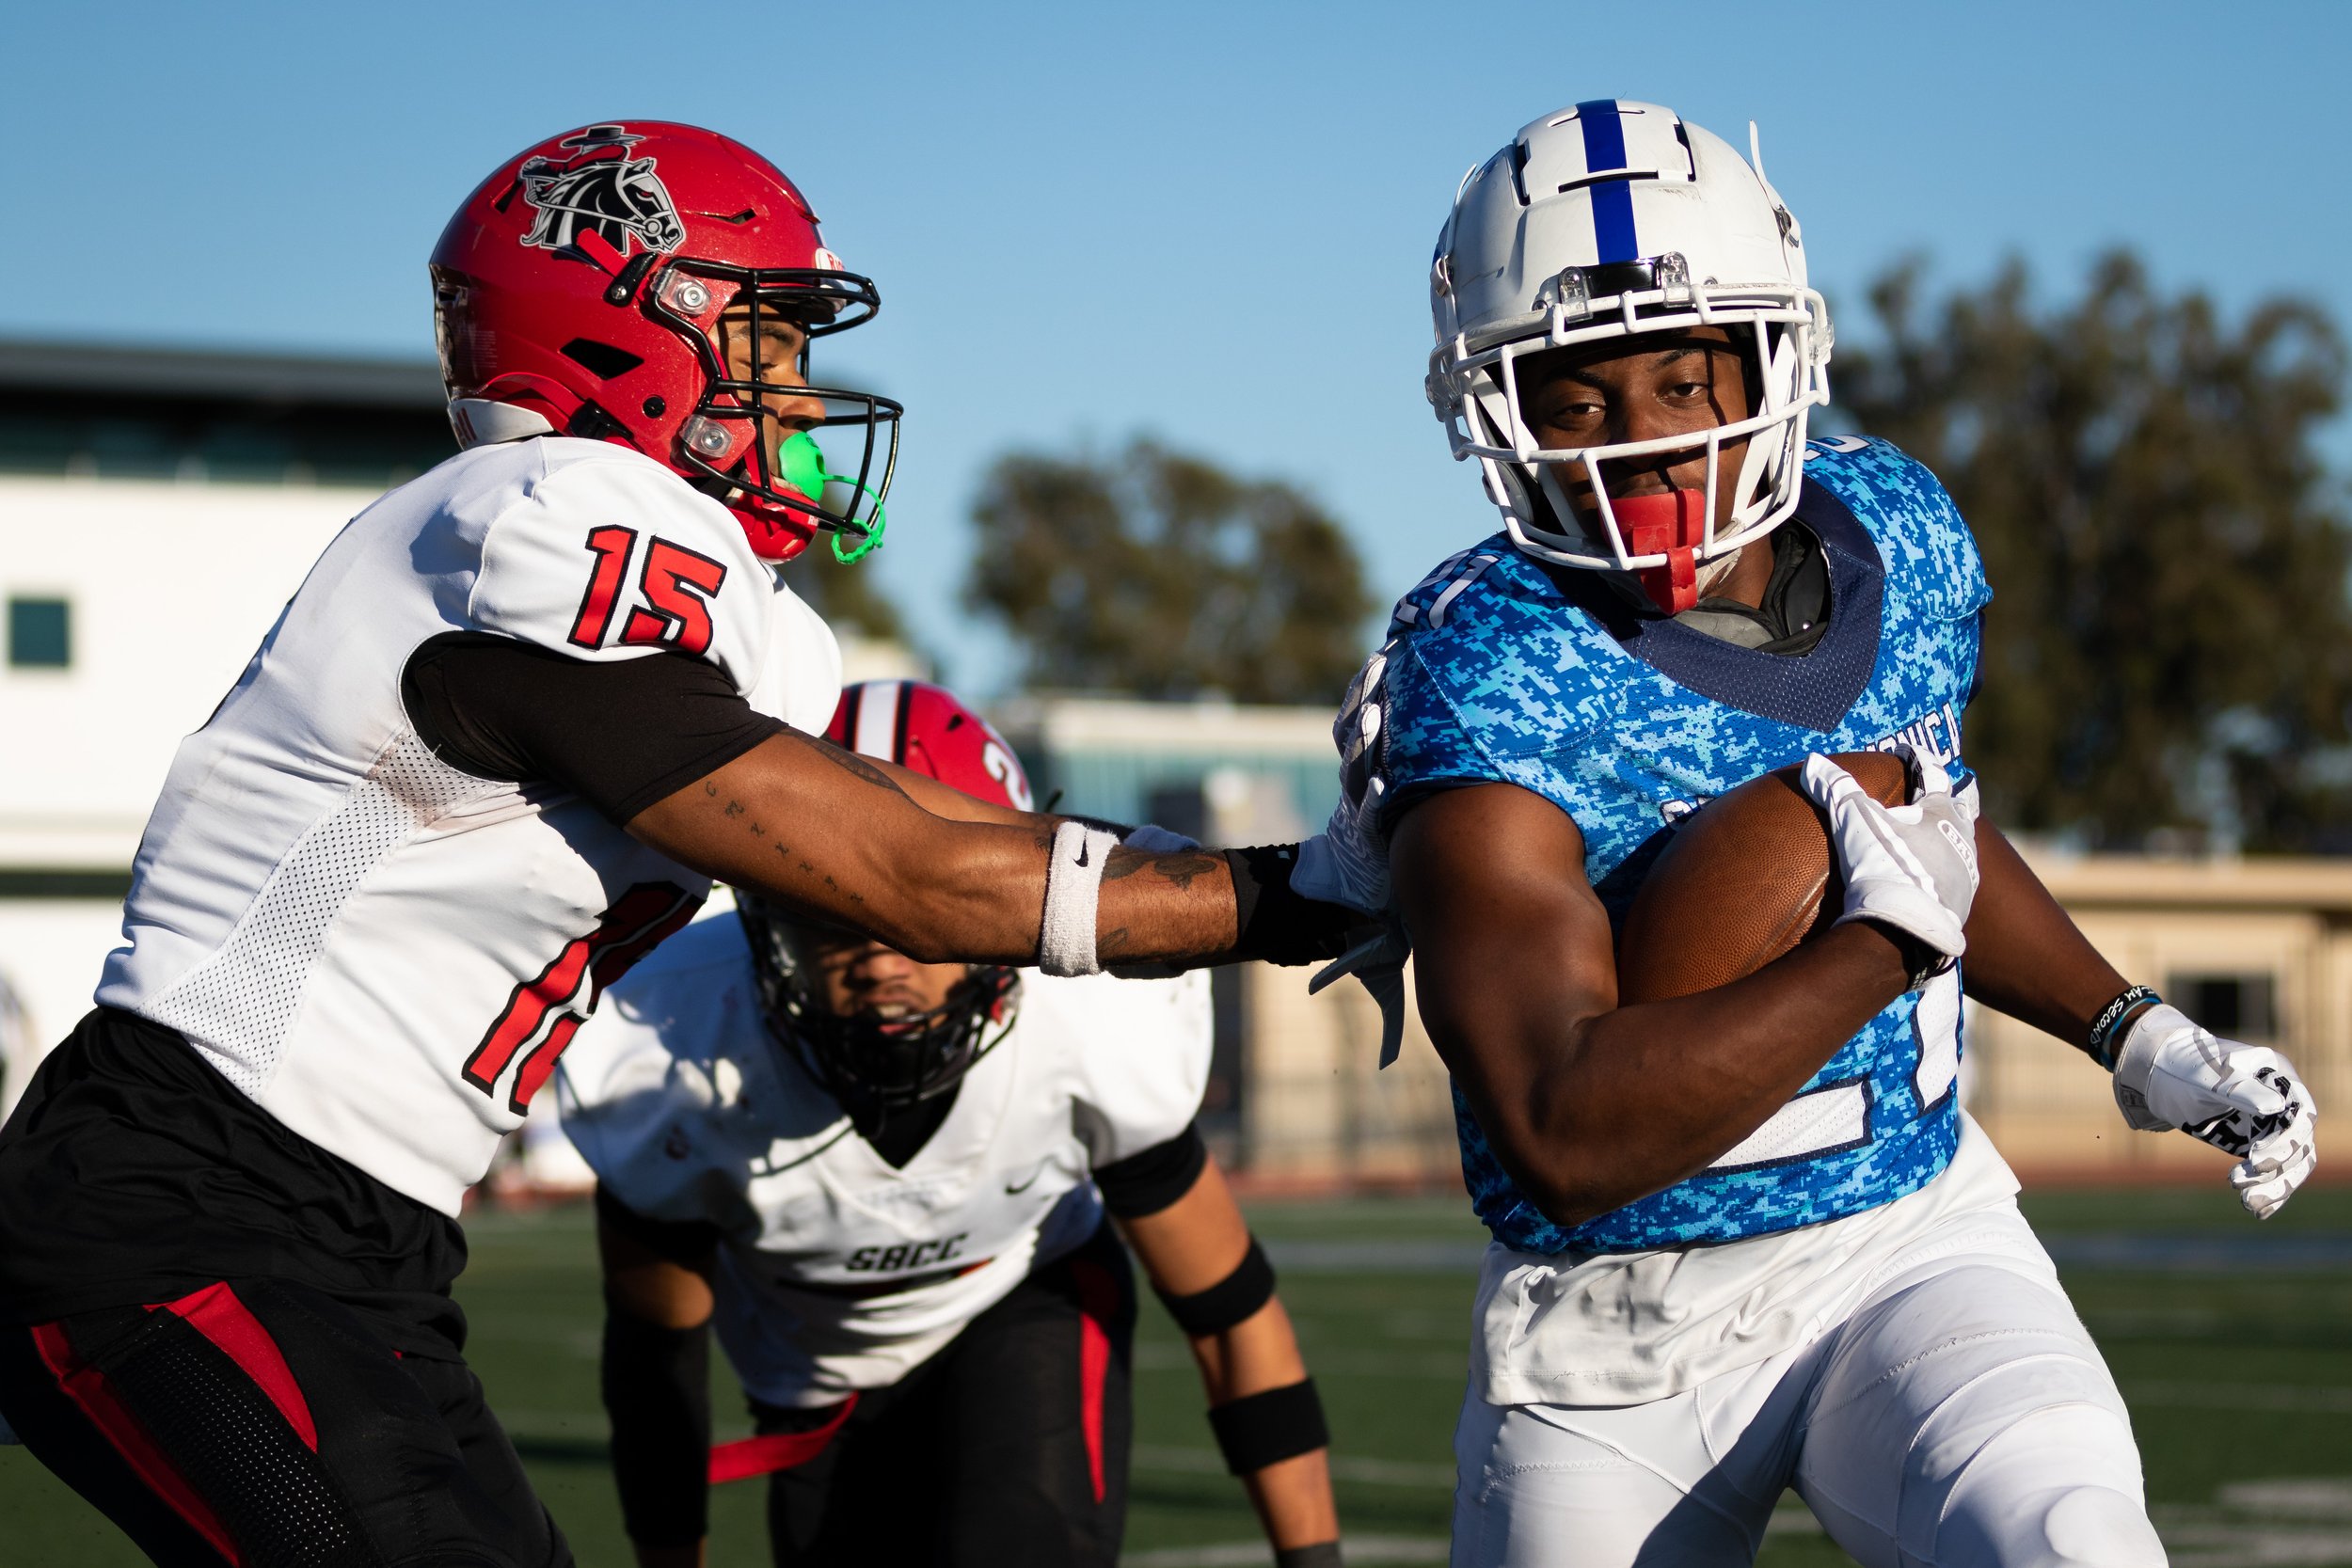  Santa Monica College Corsair Myles Parker (21, right) running the ball as Santa Barbara City College Vaquero Lamar Campbell (15, left) pushes him out of bounds during the third quarter of a recent home game on Saturday, Nov. 12, 2022, at Santa Monic